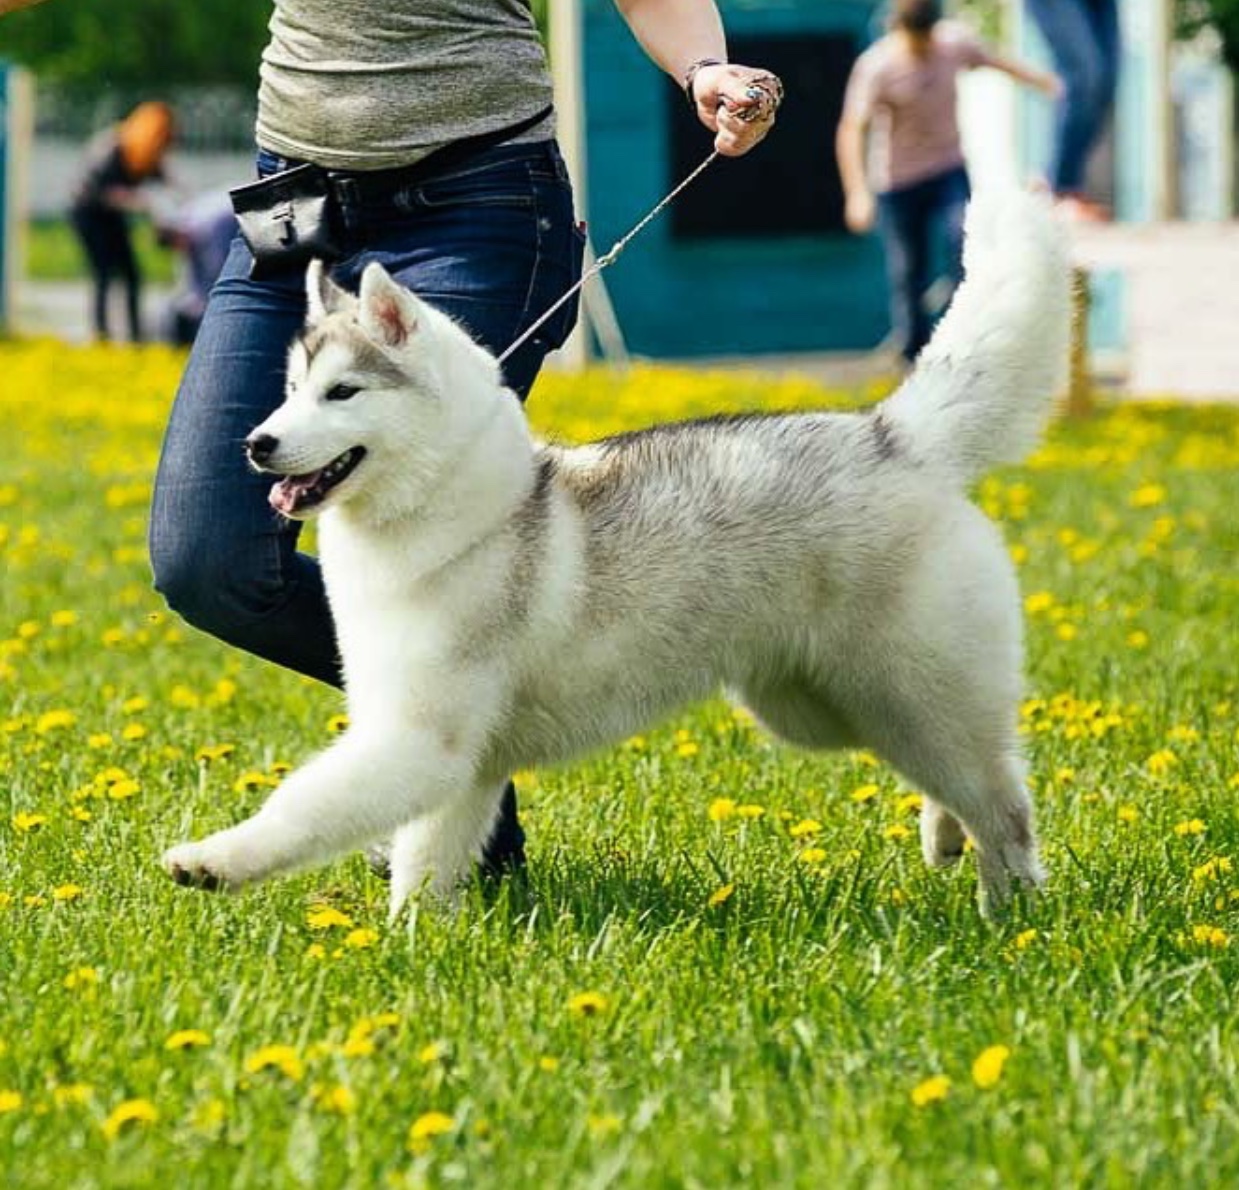 A Husky puppy running in the grass with a woman